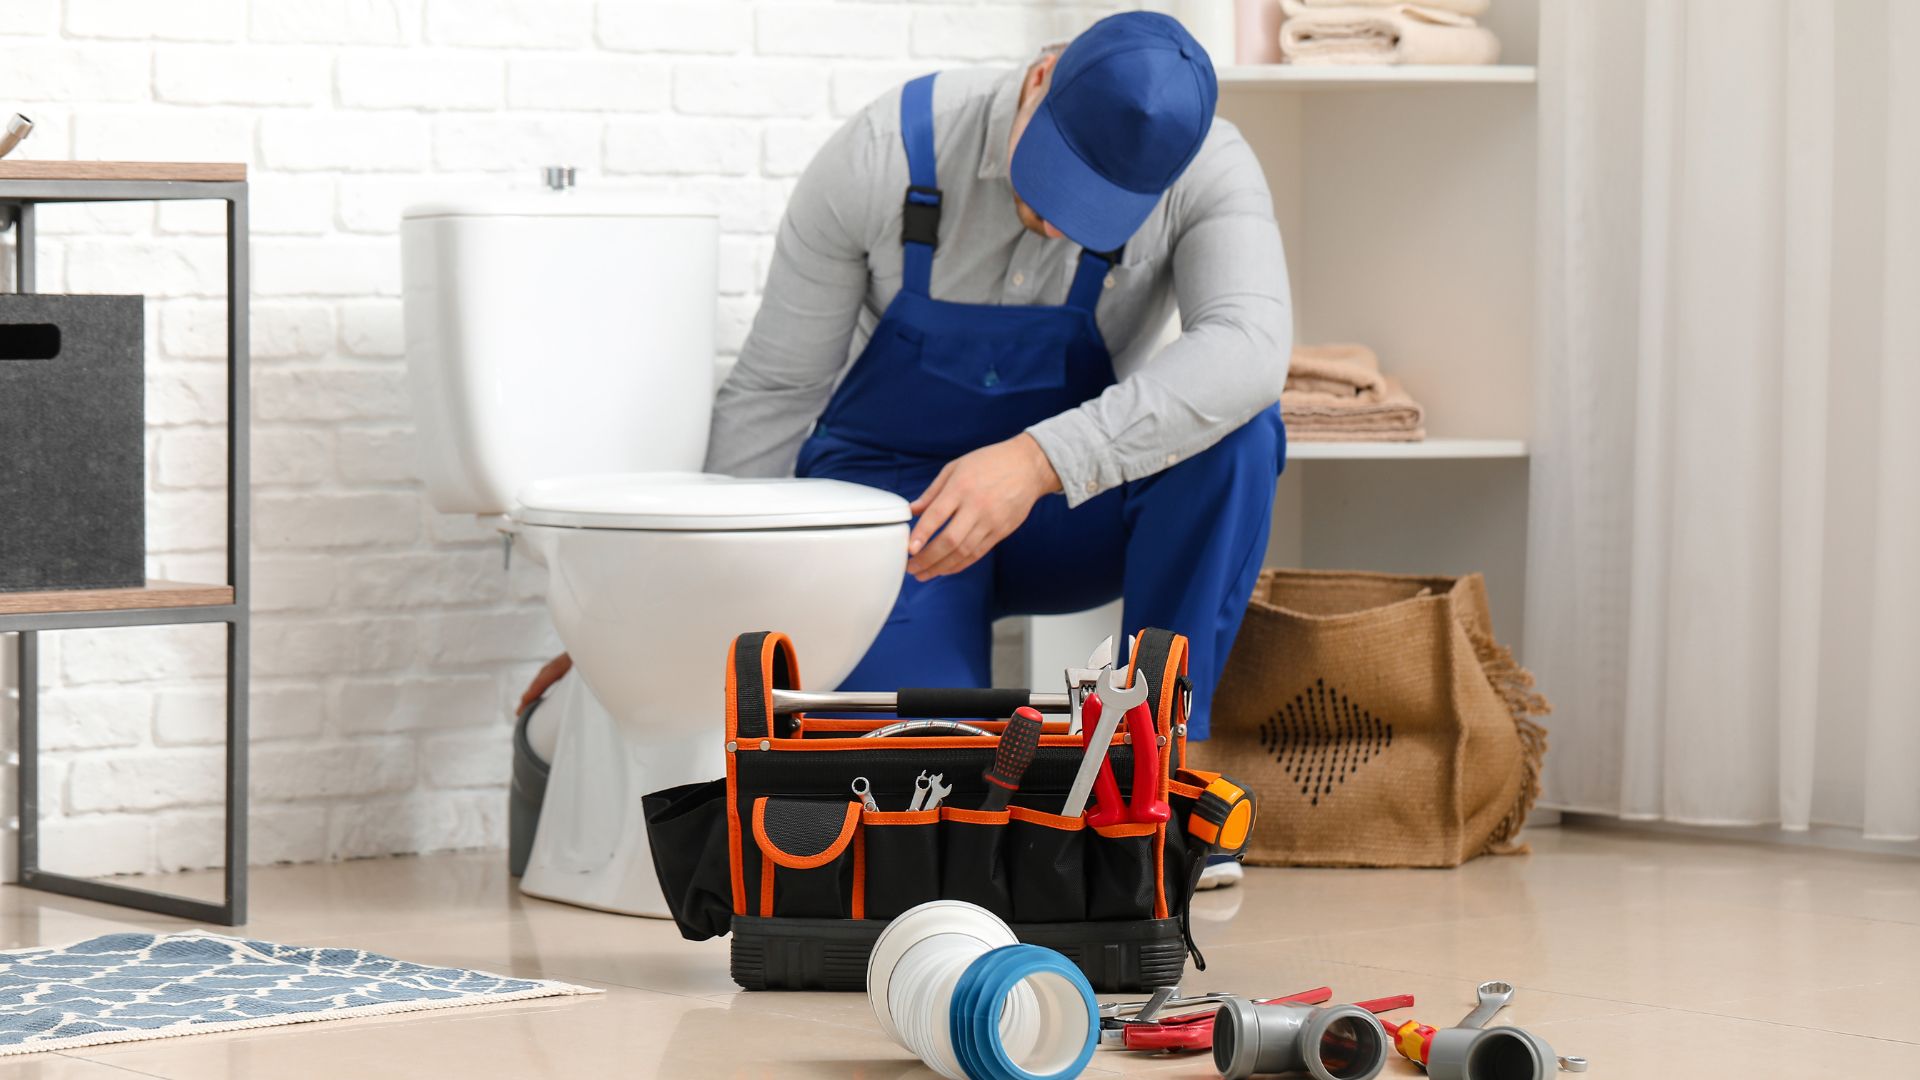 Toilet Repair & Installation in Charleston from Fix-it 24/7 Air Conditioning, Plumbing & Heating